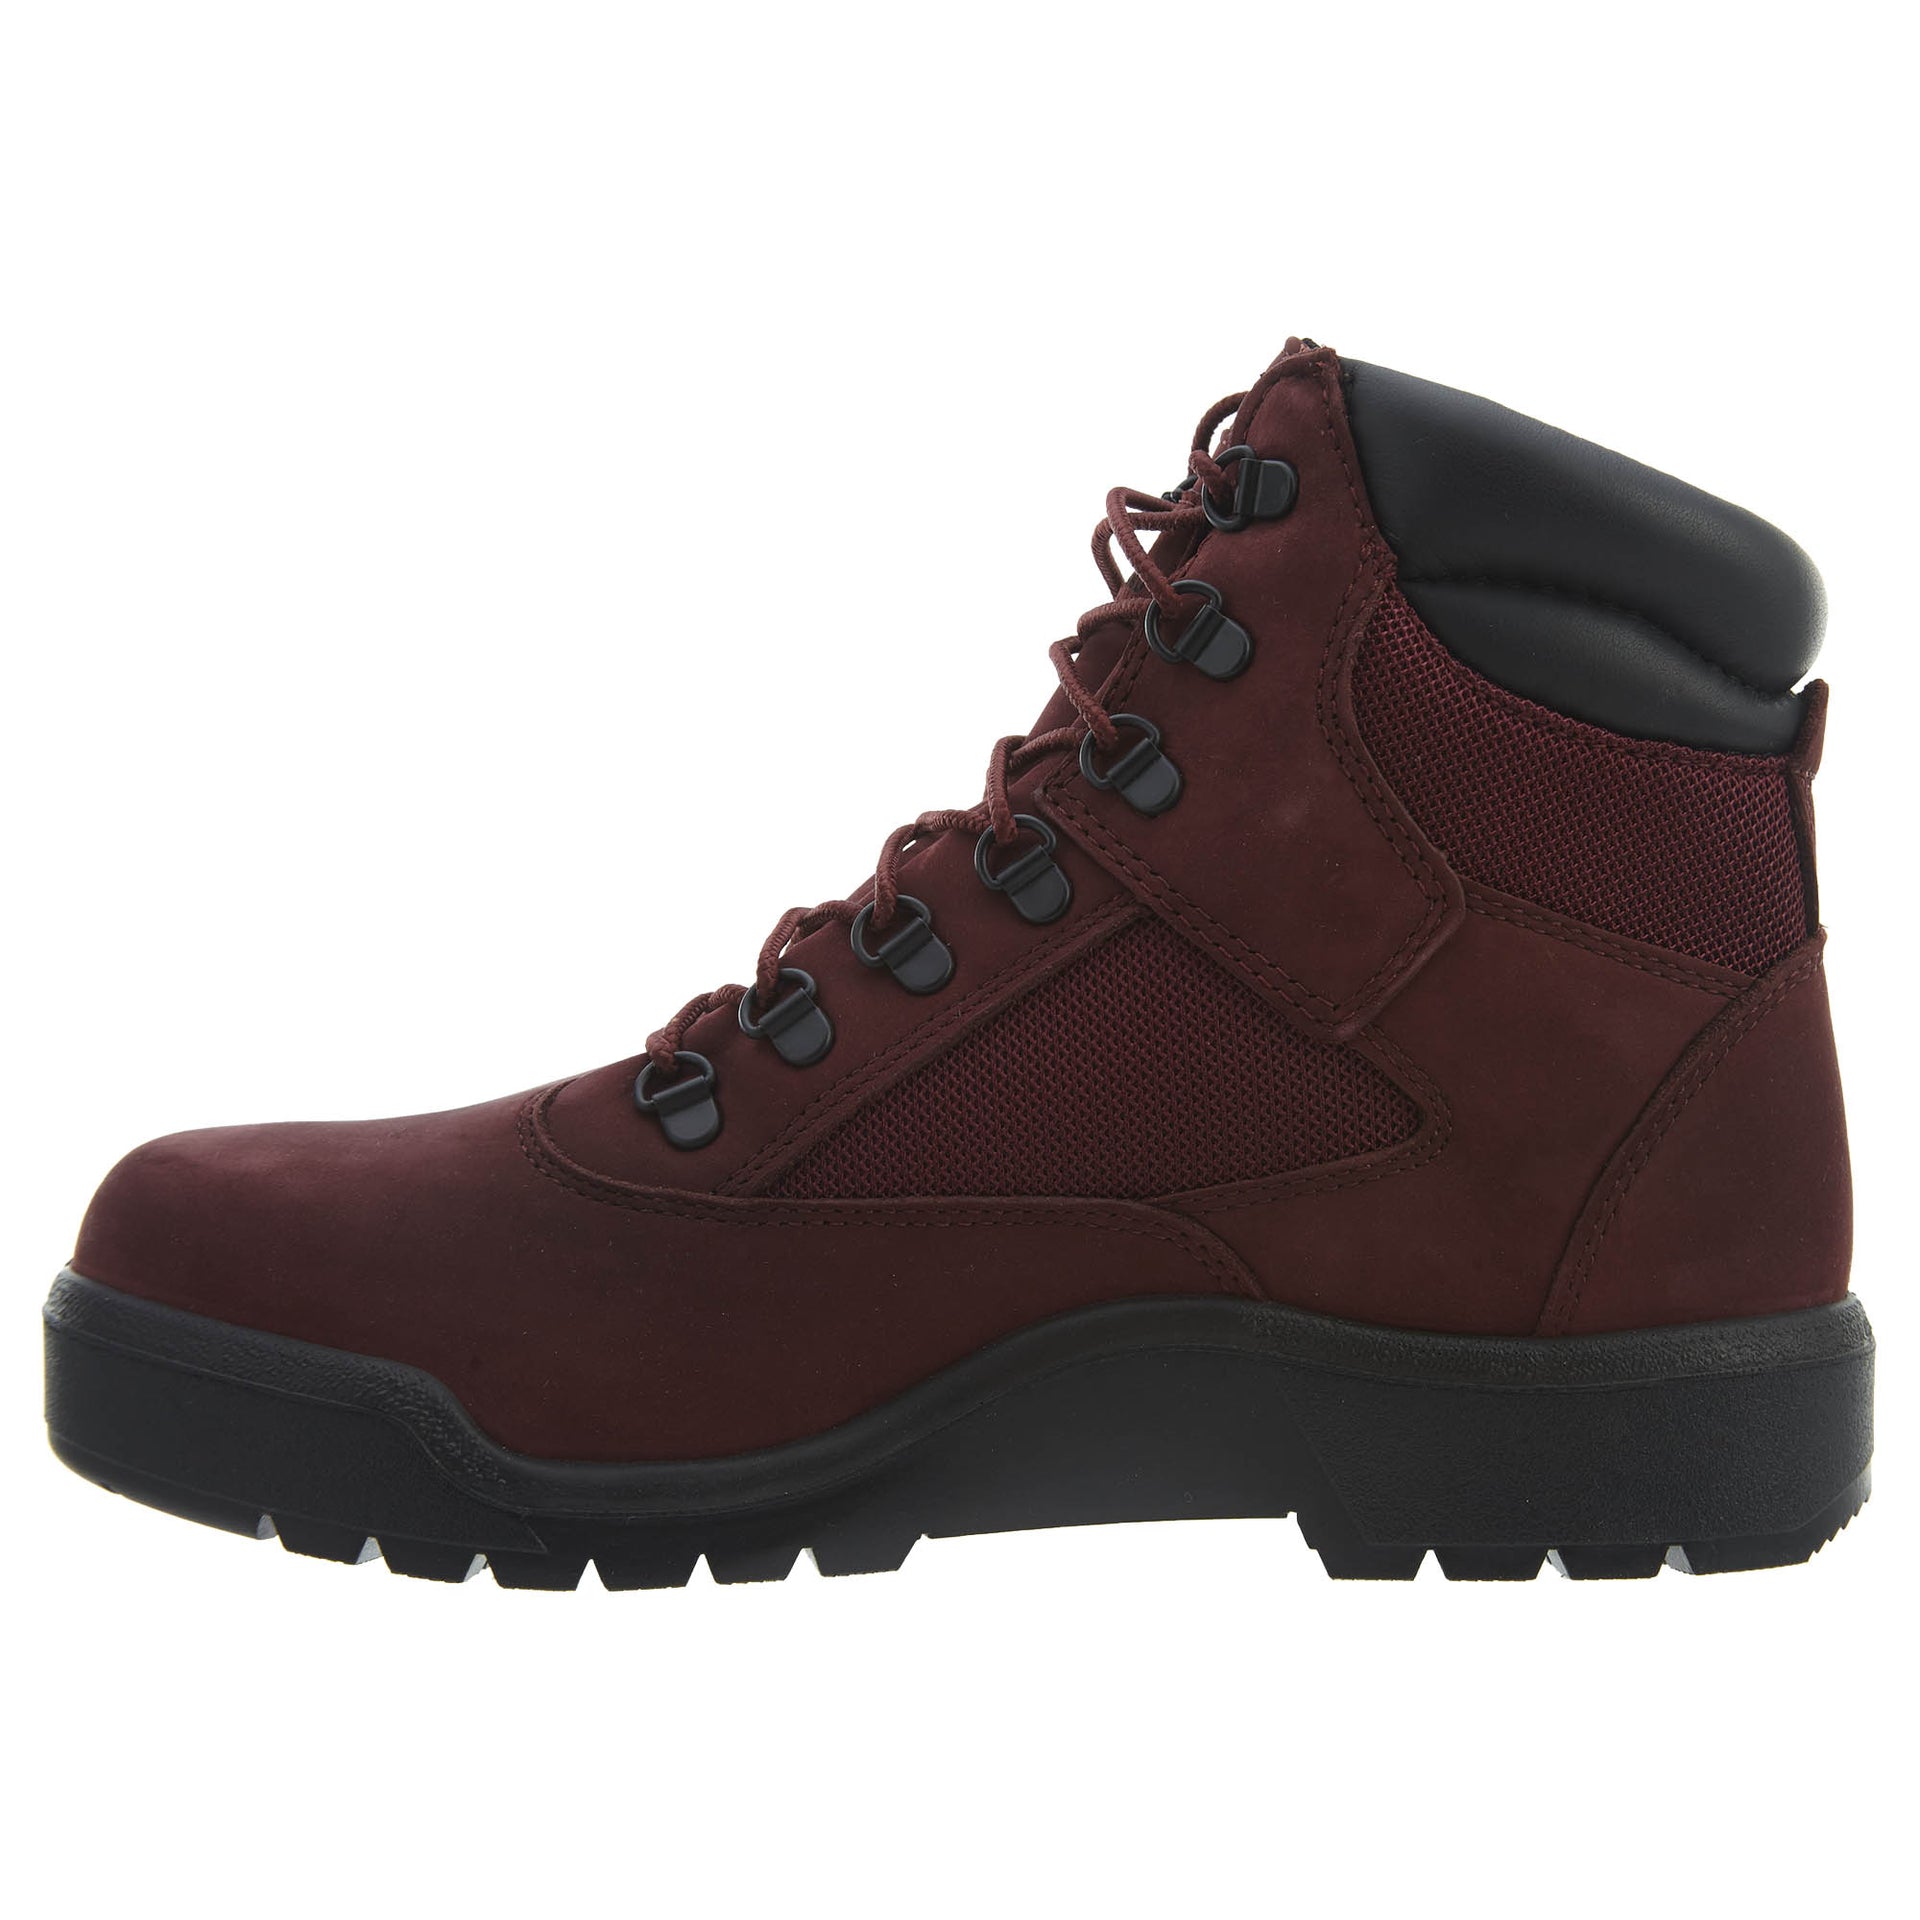 Timberland 6" Field Boots Mens Style : Tb0a1a2x